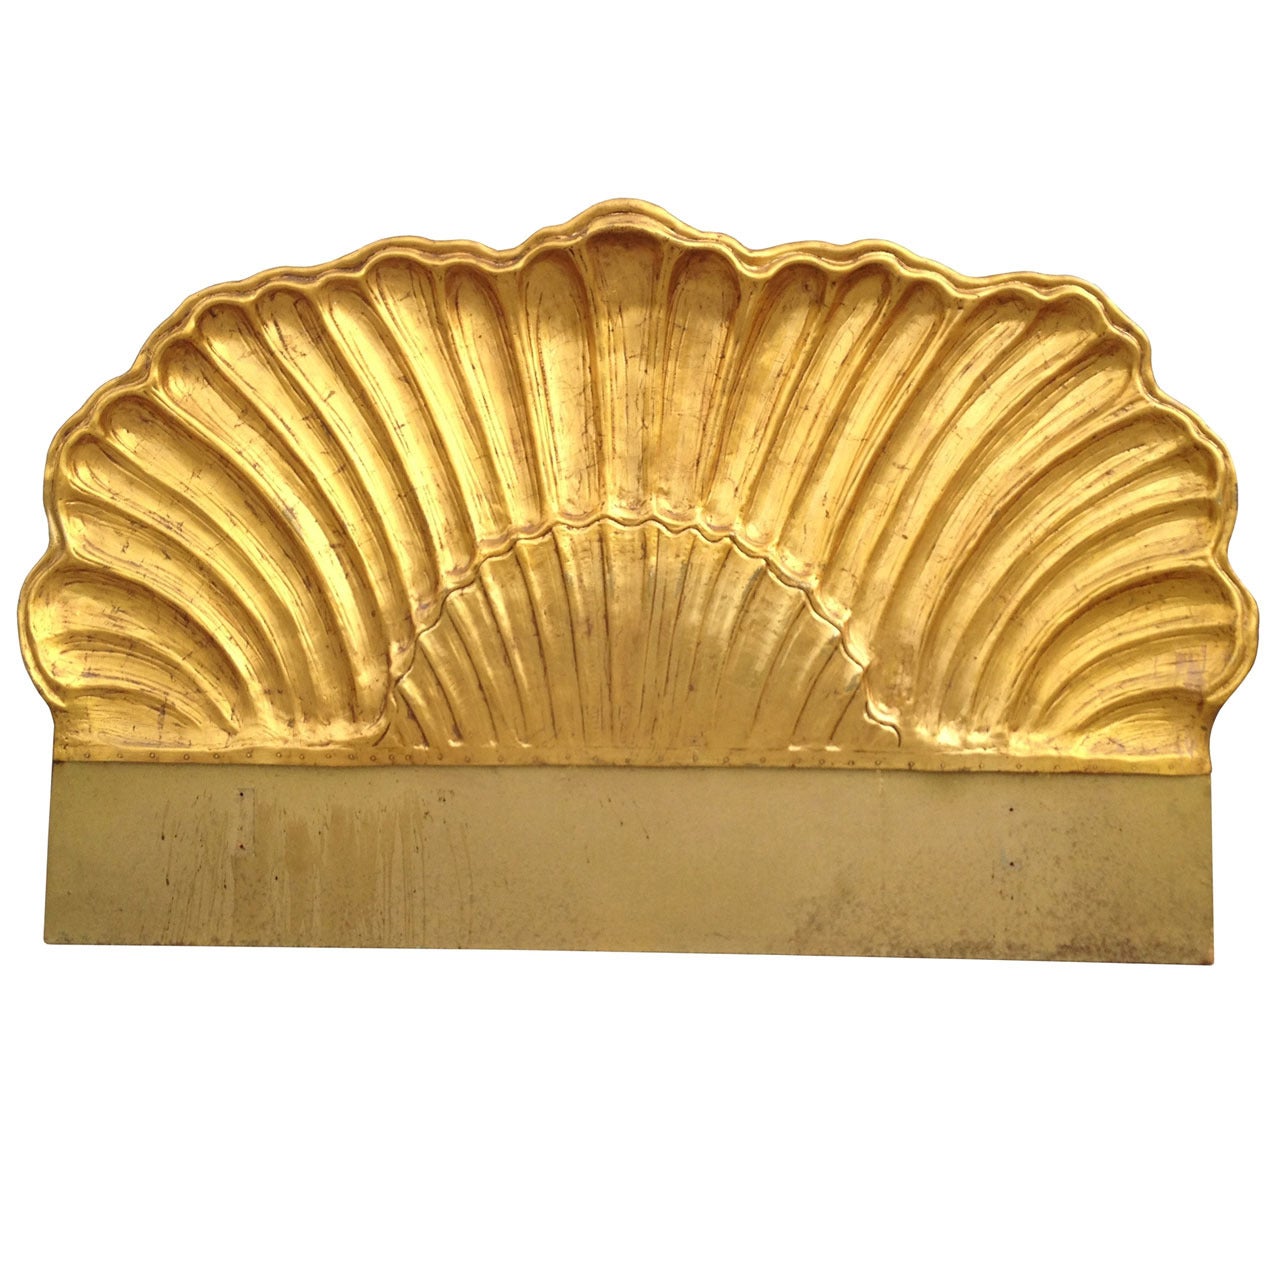 Gold Leaf Shell Shaped King Size Headboard Attb to Grosfeld House